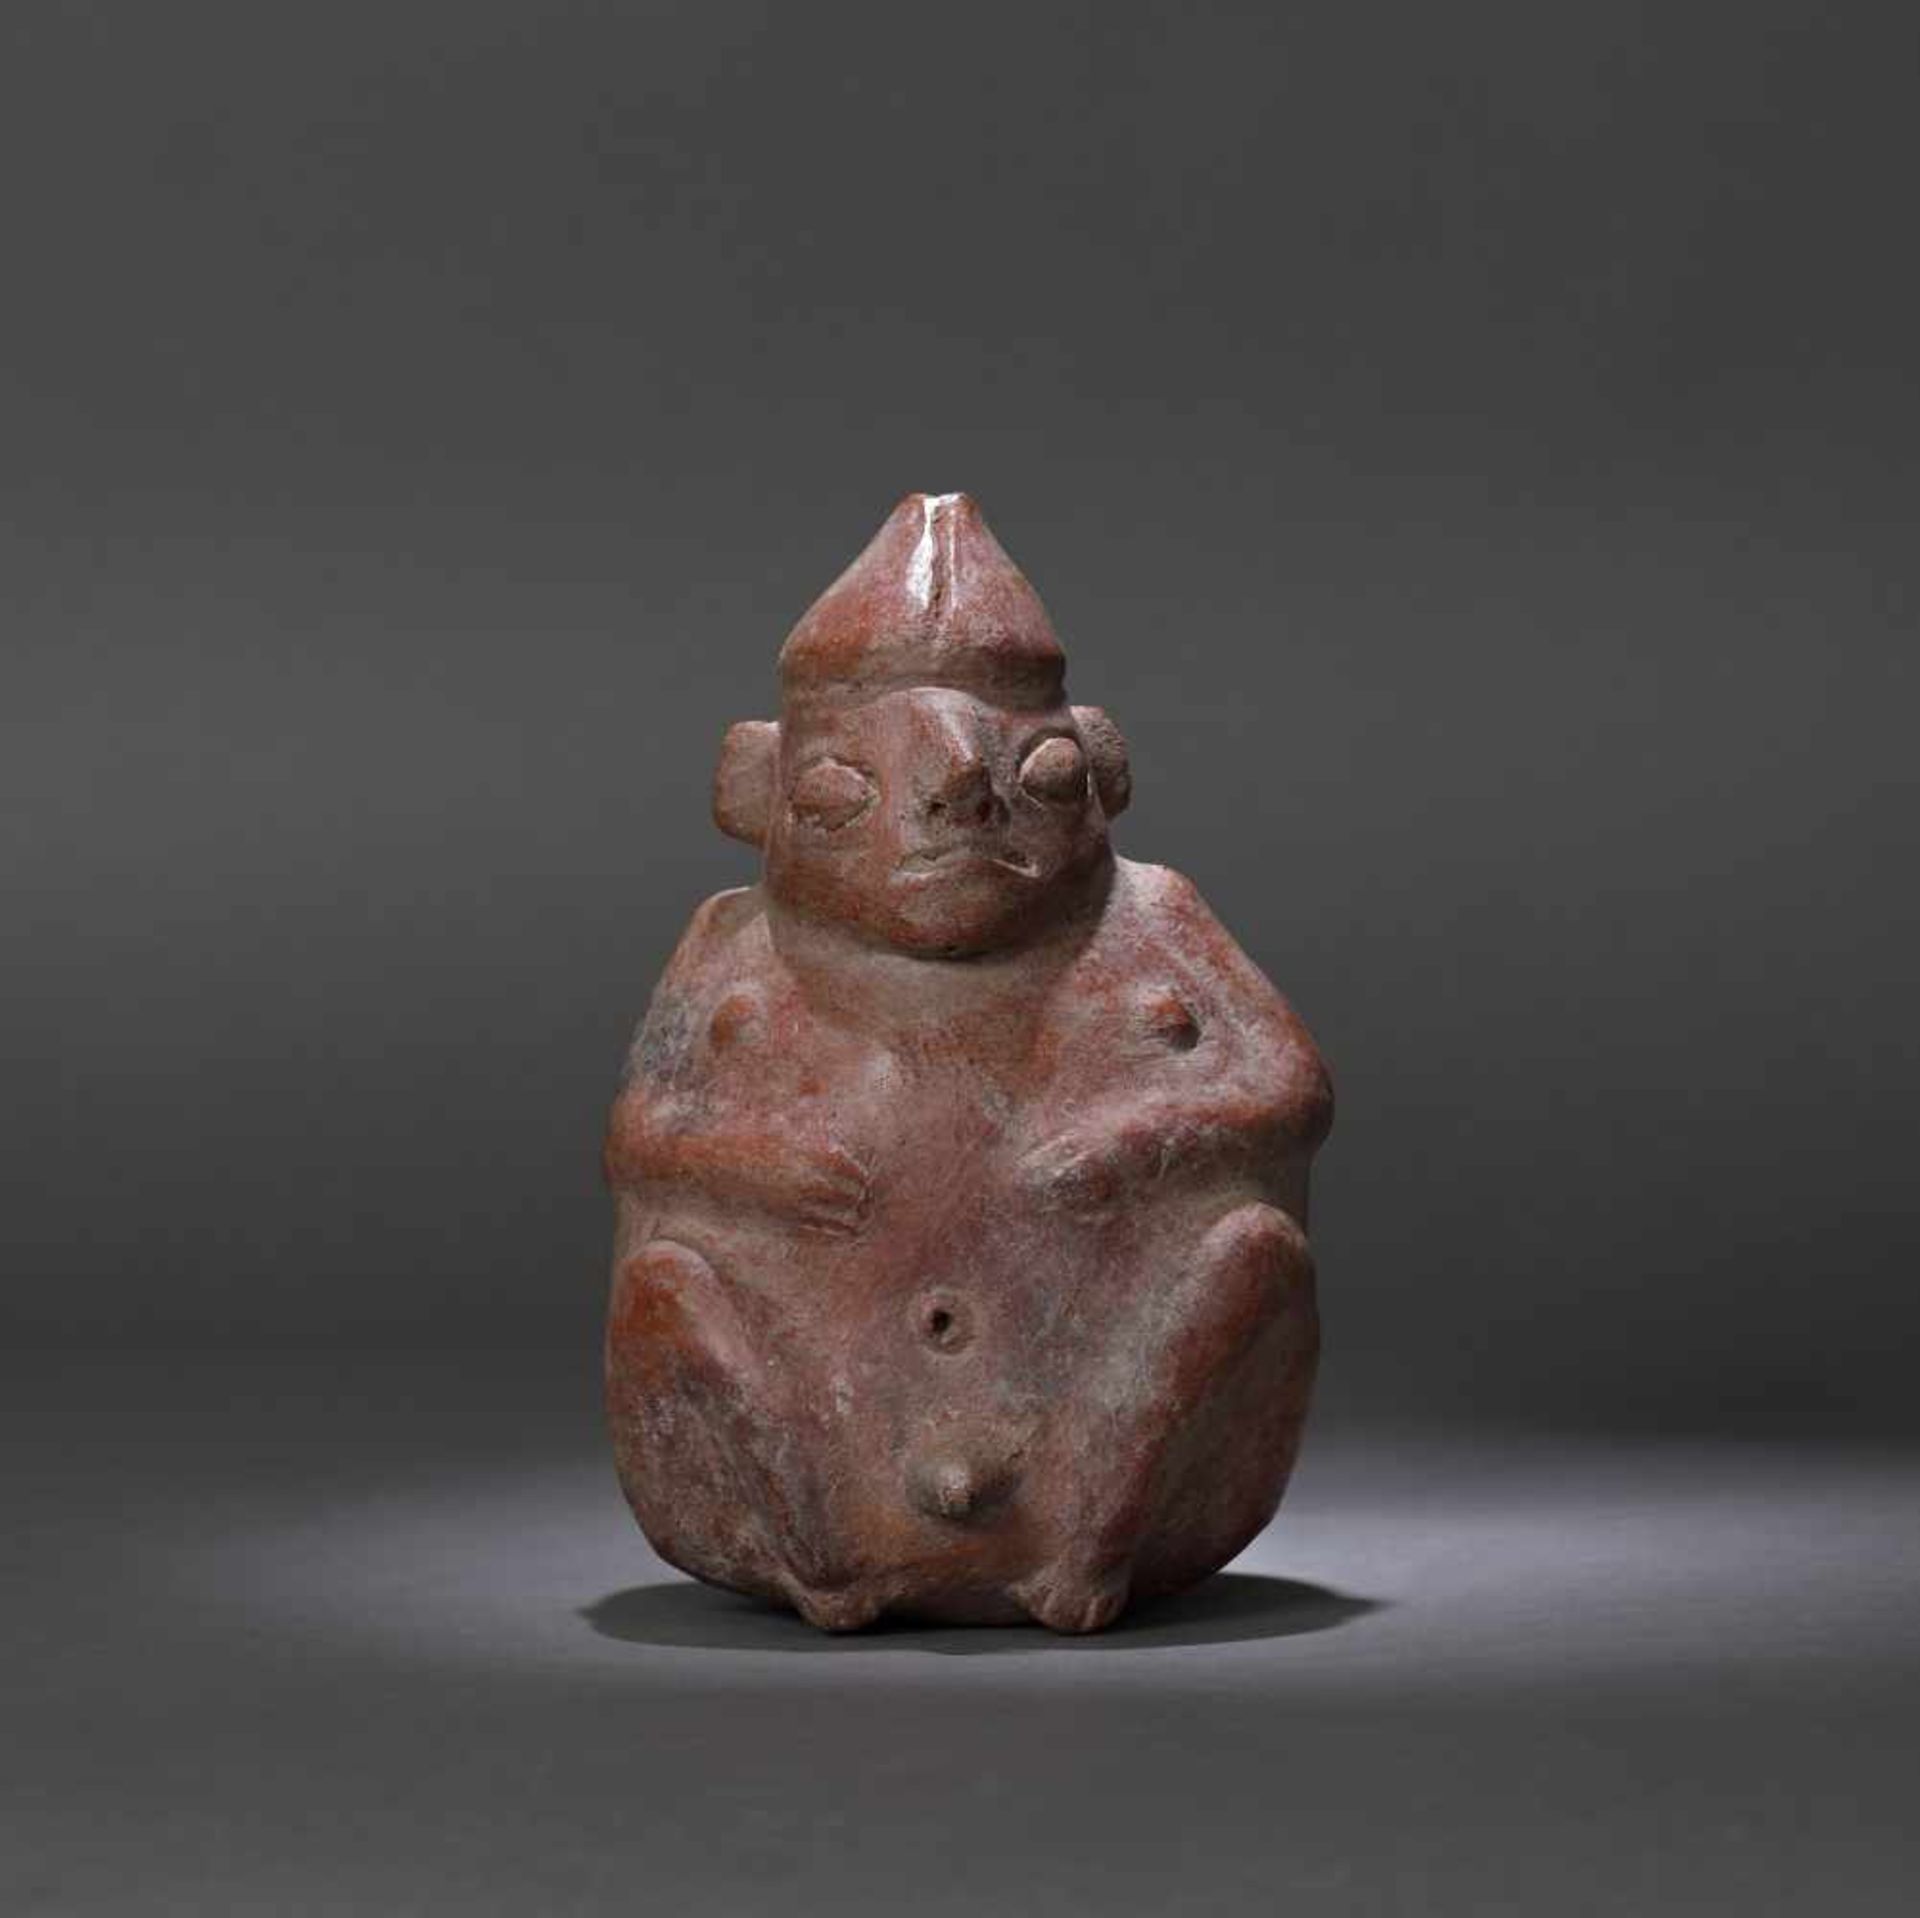 Ceramic vessel, illustrating a man, Vicus culture, Peru, approx. 1,550 years old, 5th century (accom